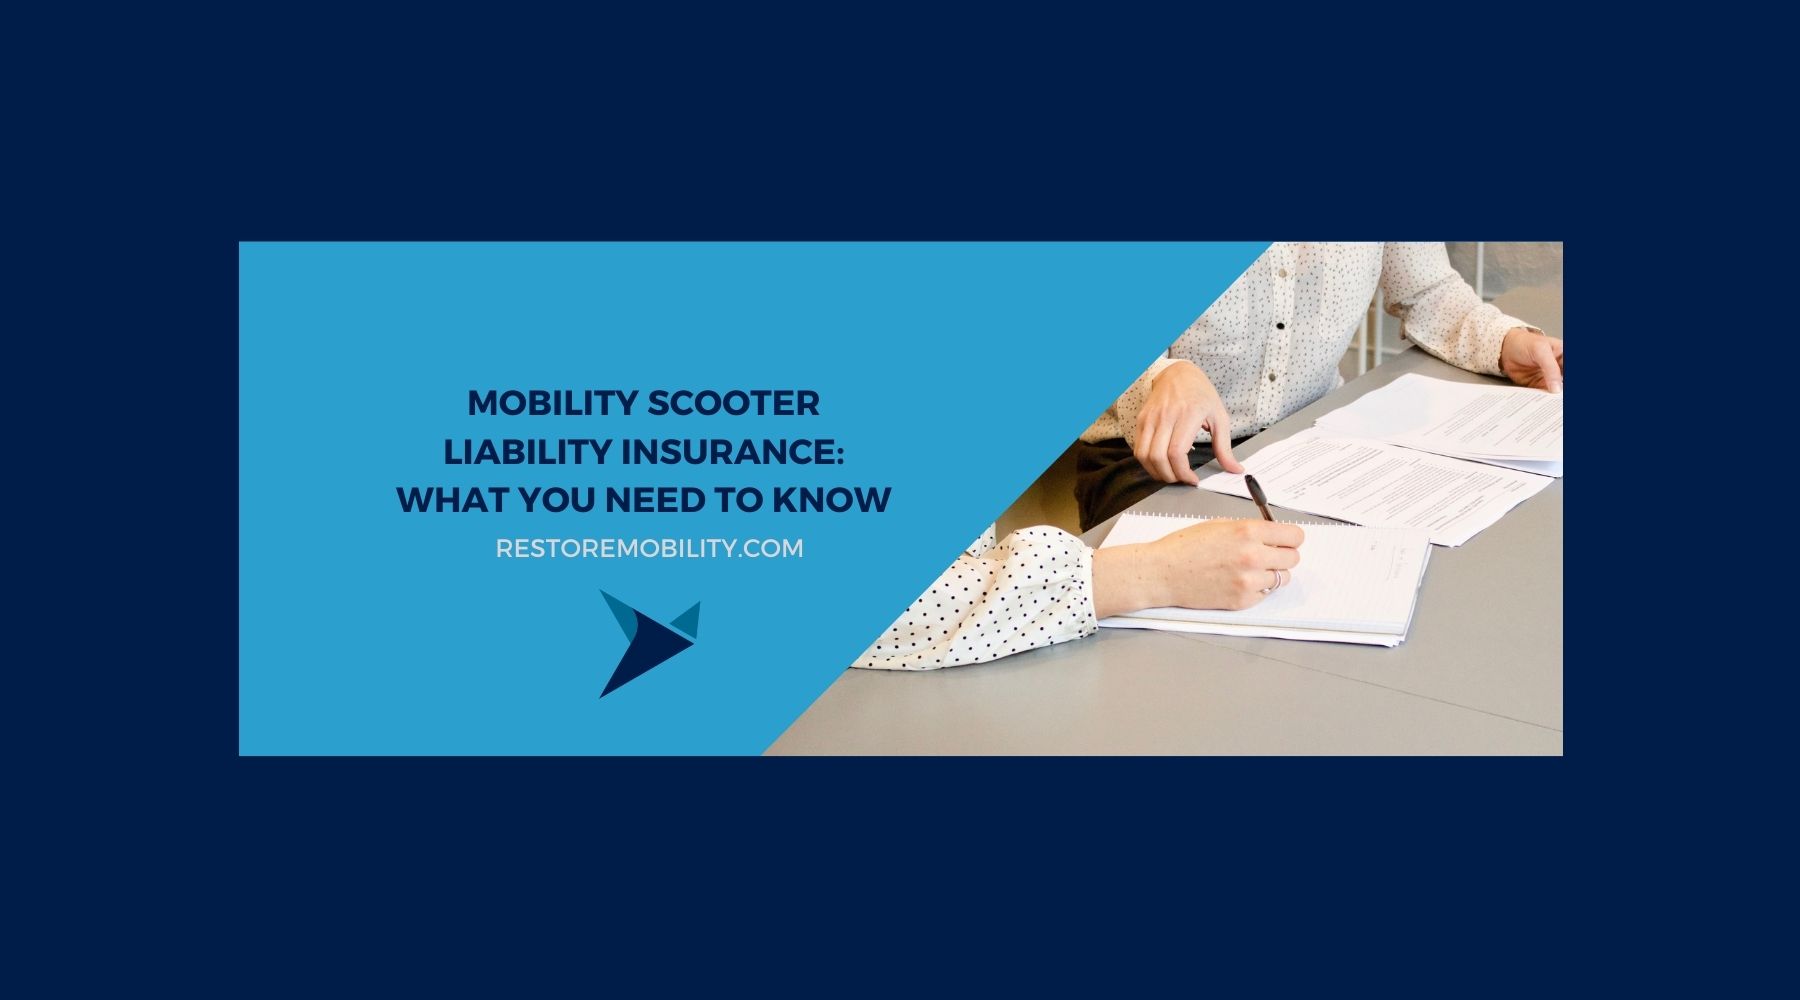 Mobility Scooter Liability Insurance: What You Need to Know